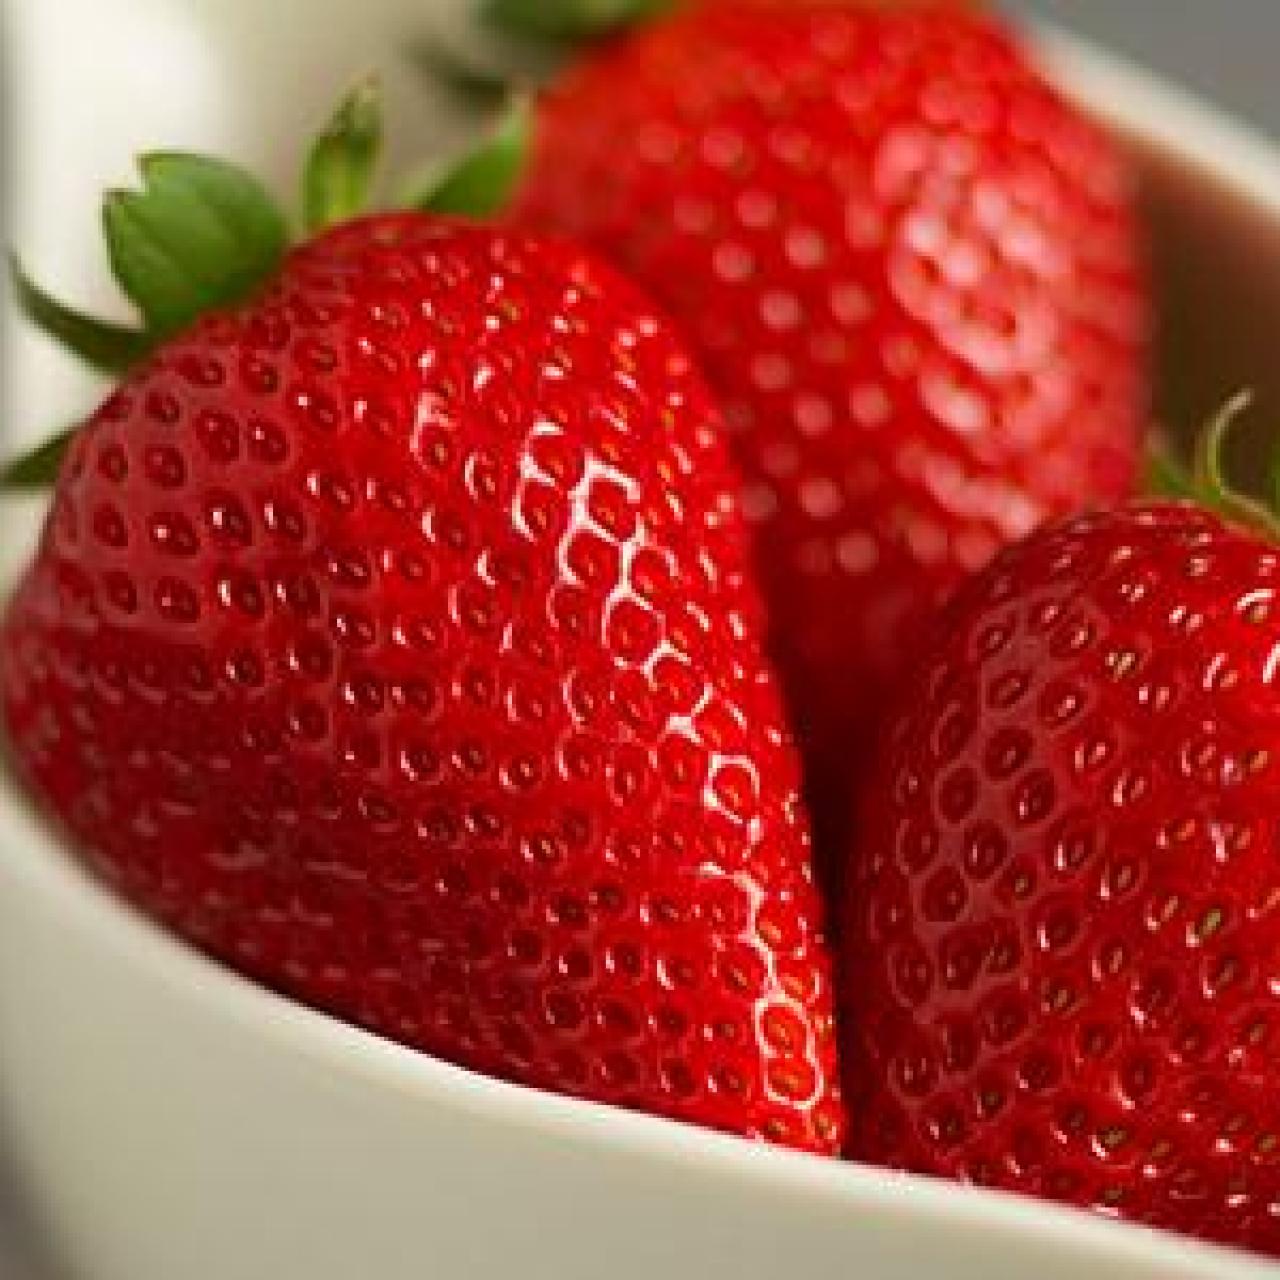 Strawberries 101: Nutrition Facts and Health Benefits